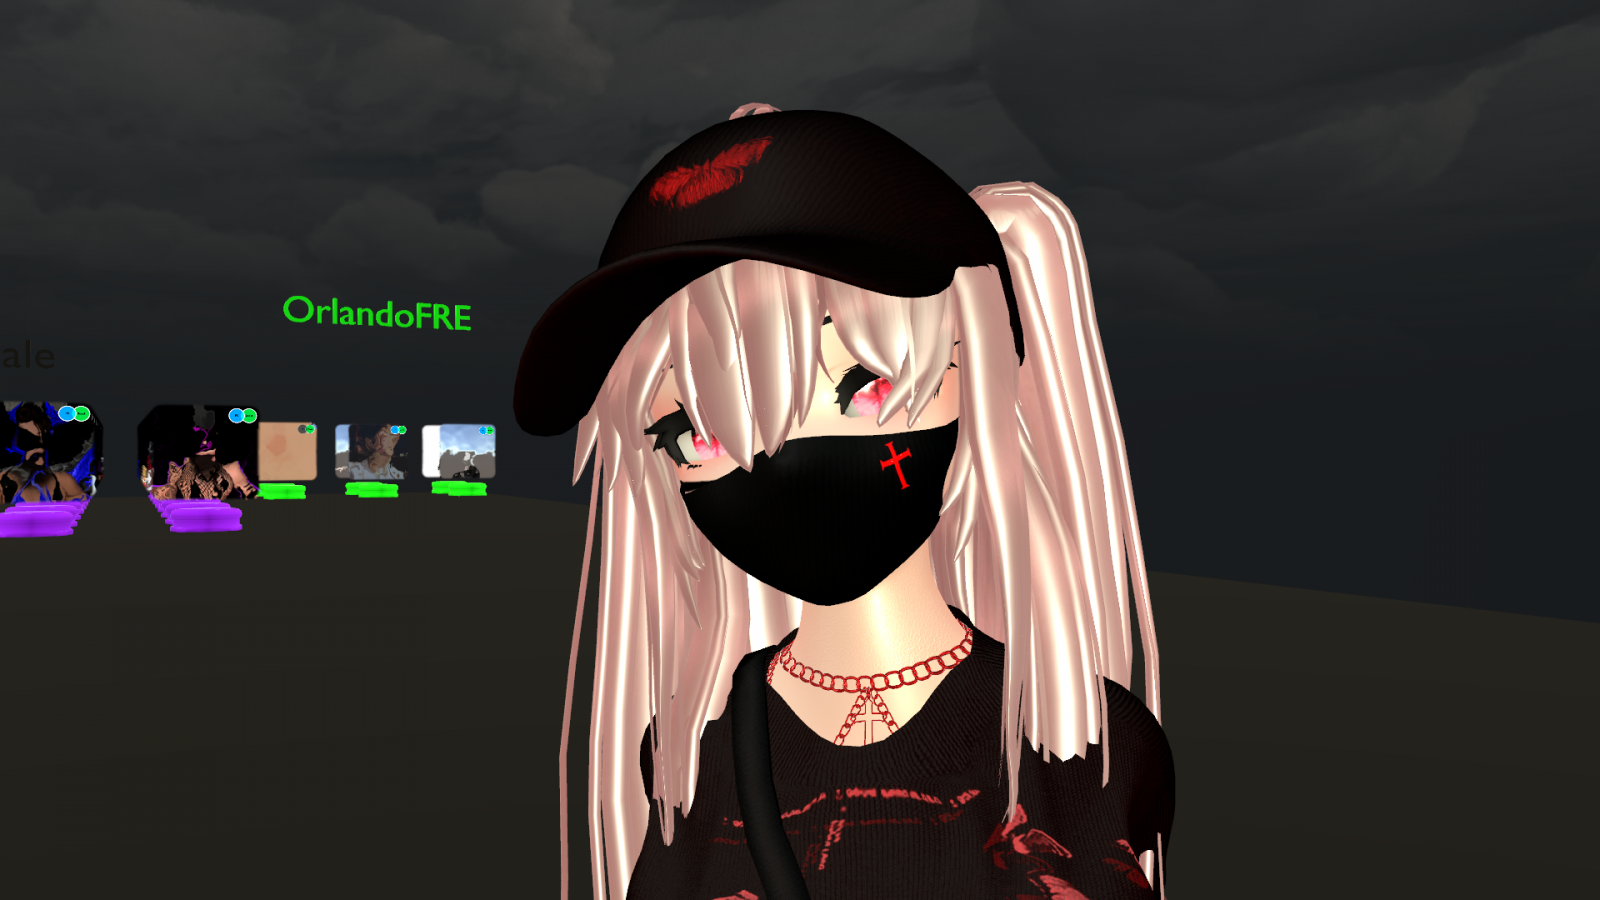 VRChat_1920x1080_2022-02-15_19-26-37.848.png